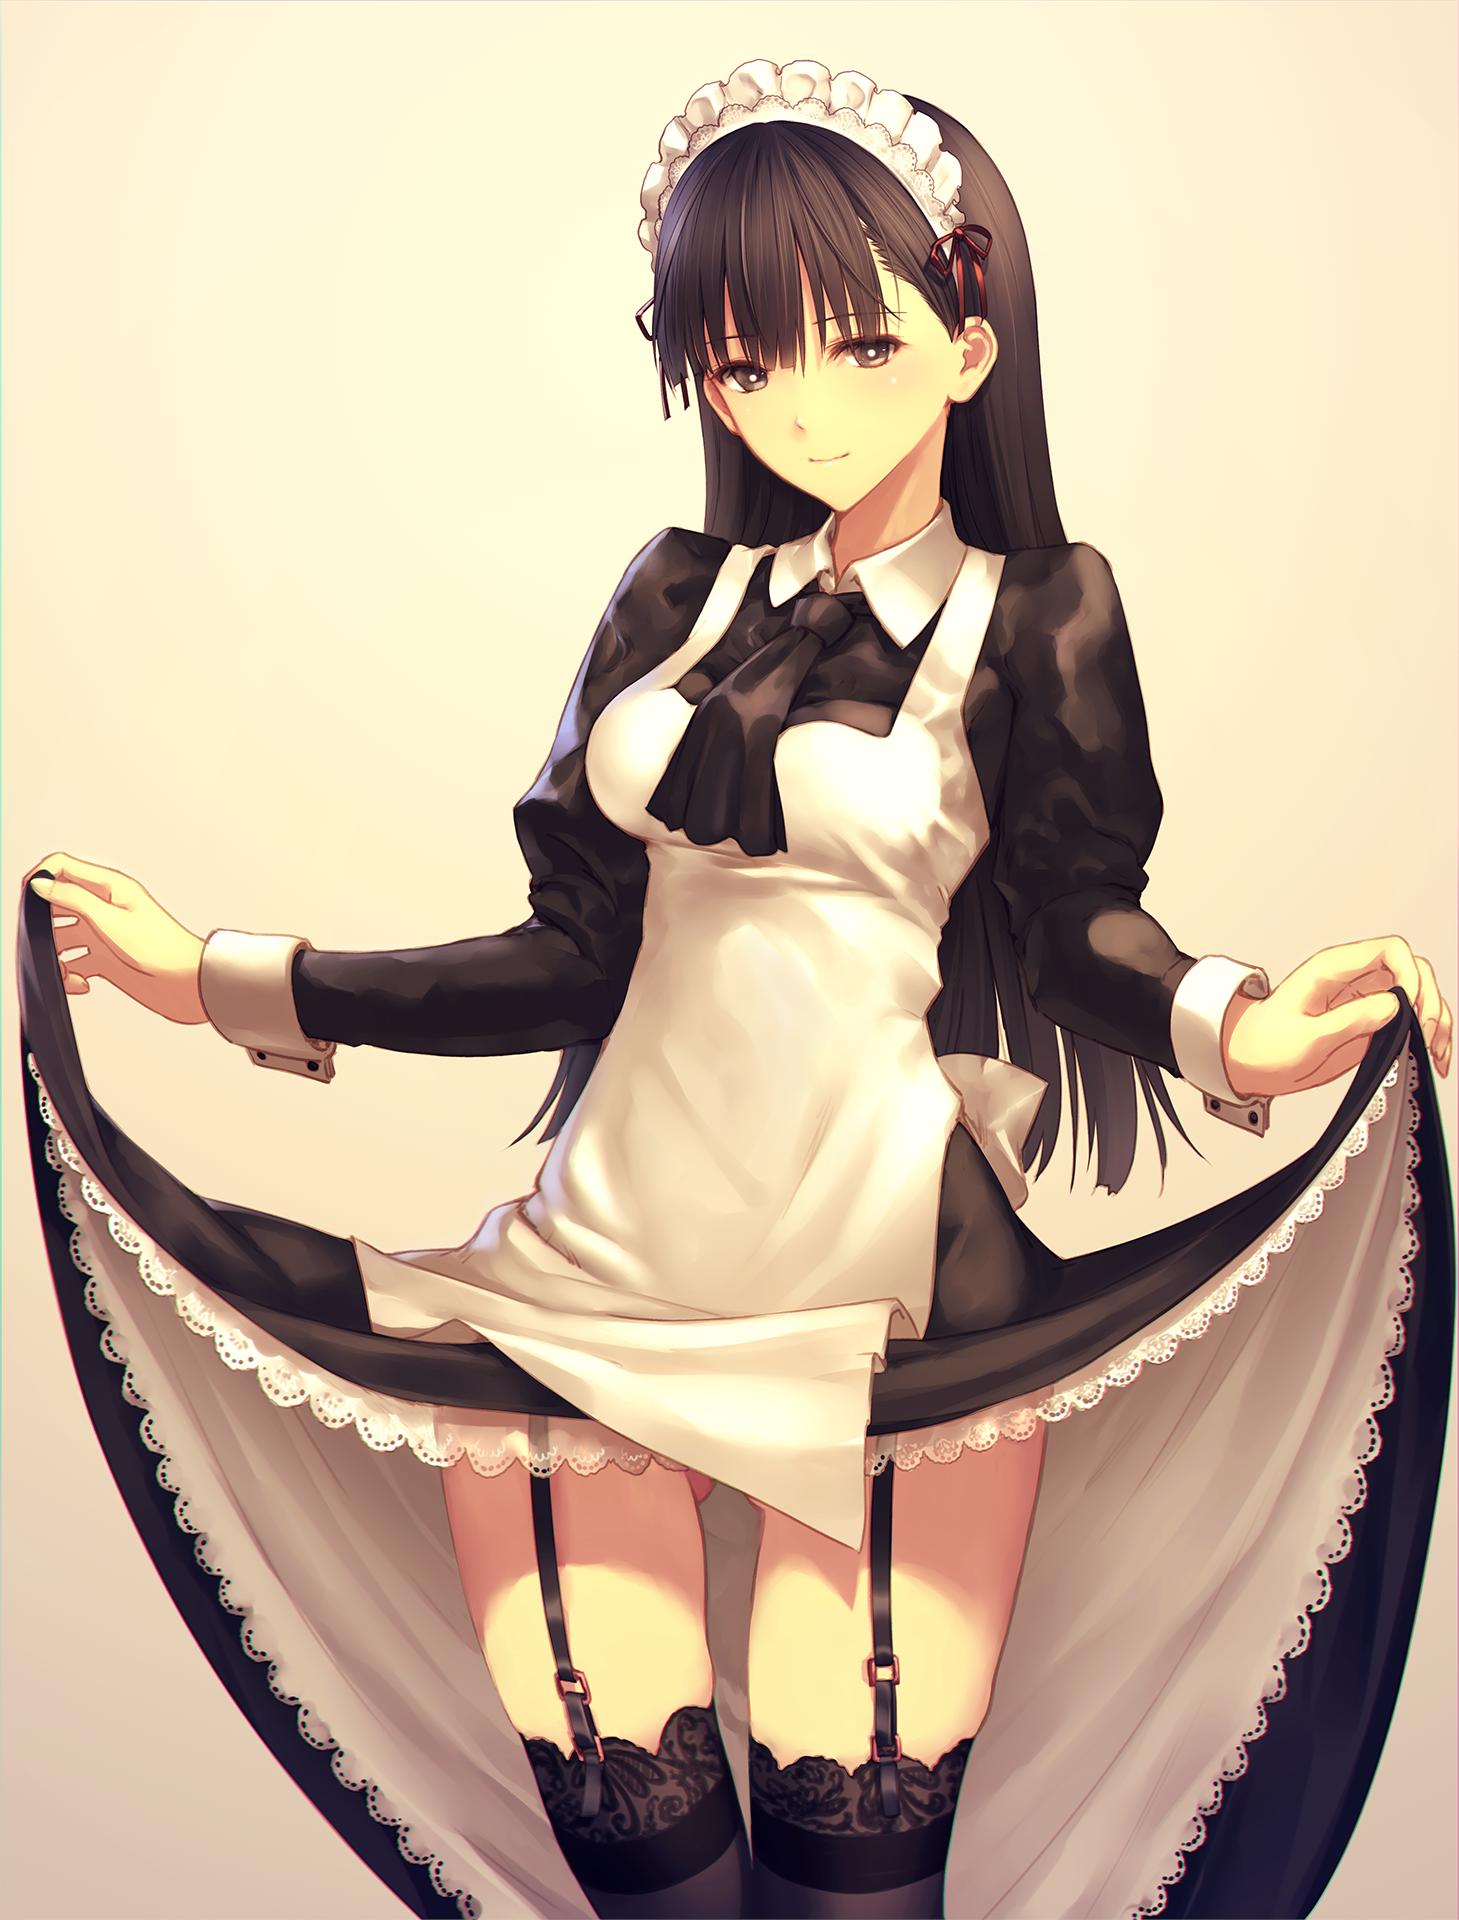 Maid sees dick lovely image